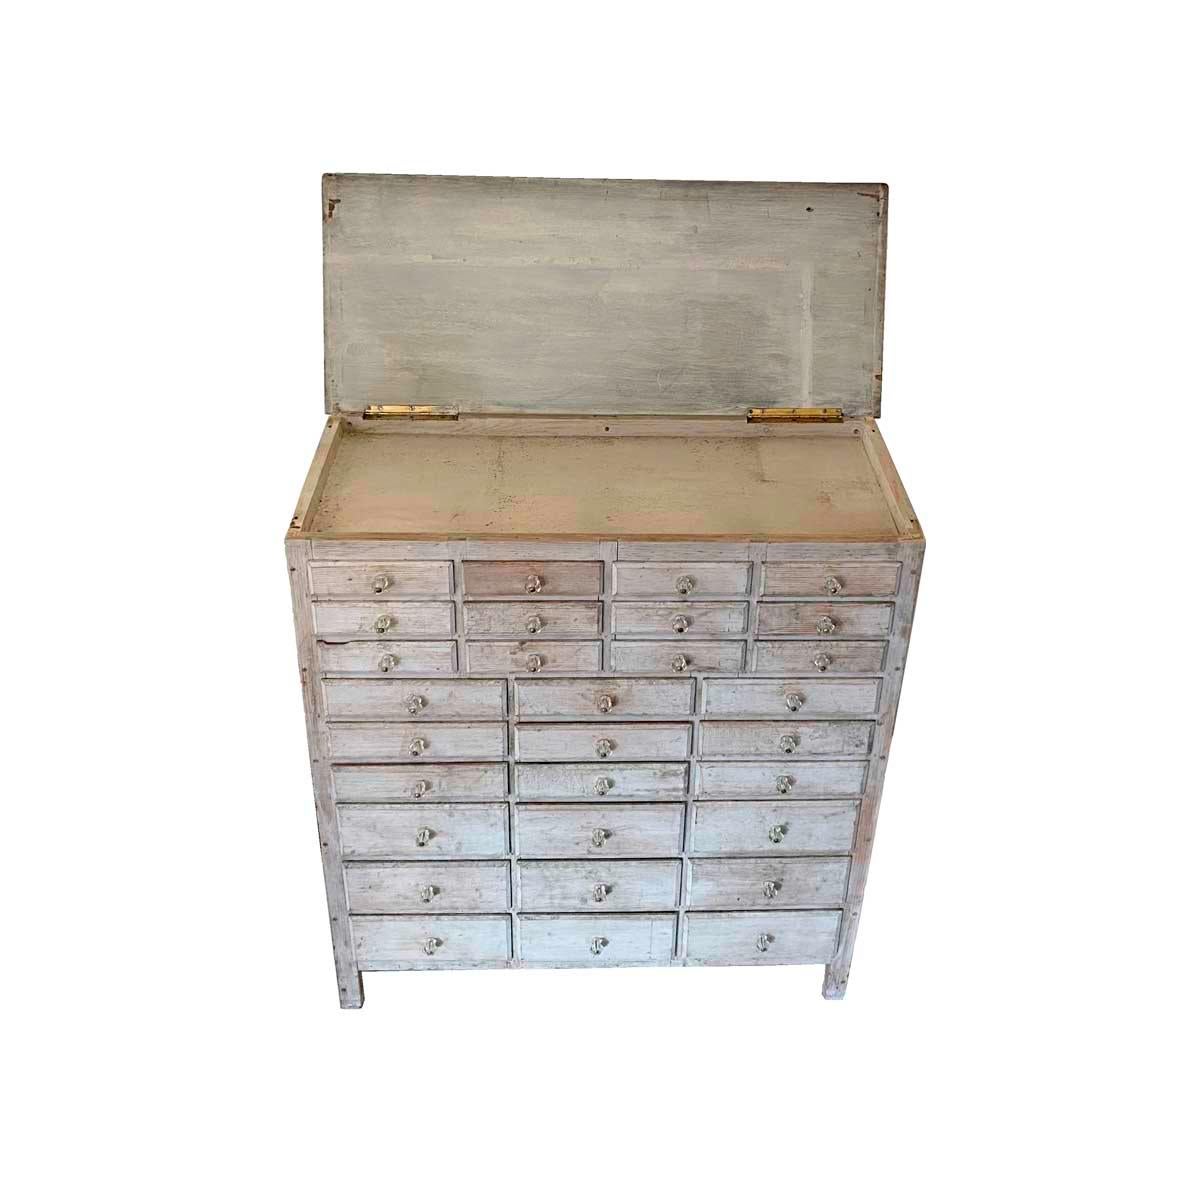 Early 20th century country apothecary or general store cabinet with 30 graduated drawers below a lift-top enclosing a shallow storage area. In original white paint, retaining it's original faceted glass drawer pulls, and having drawers with beveled